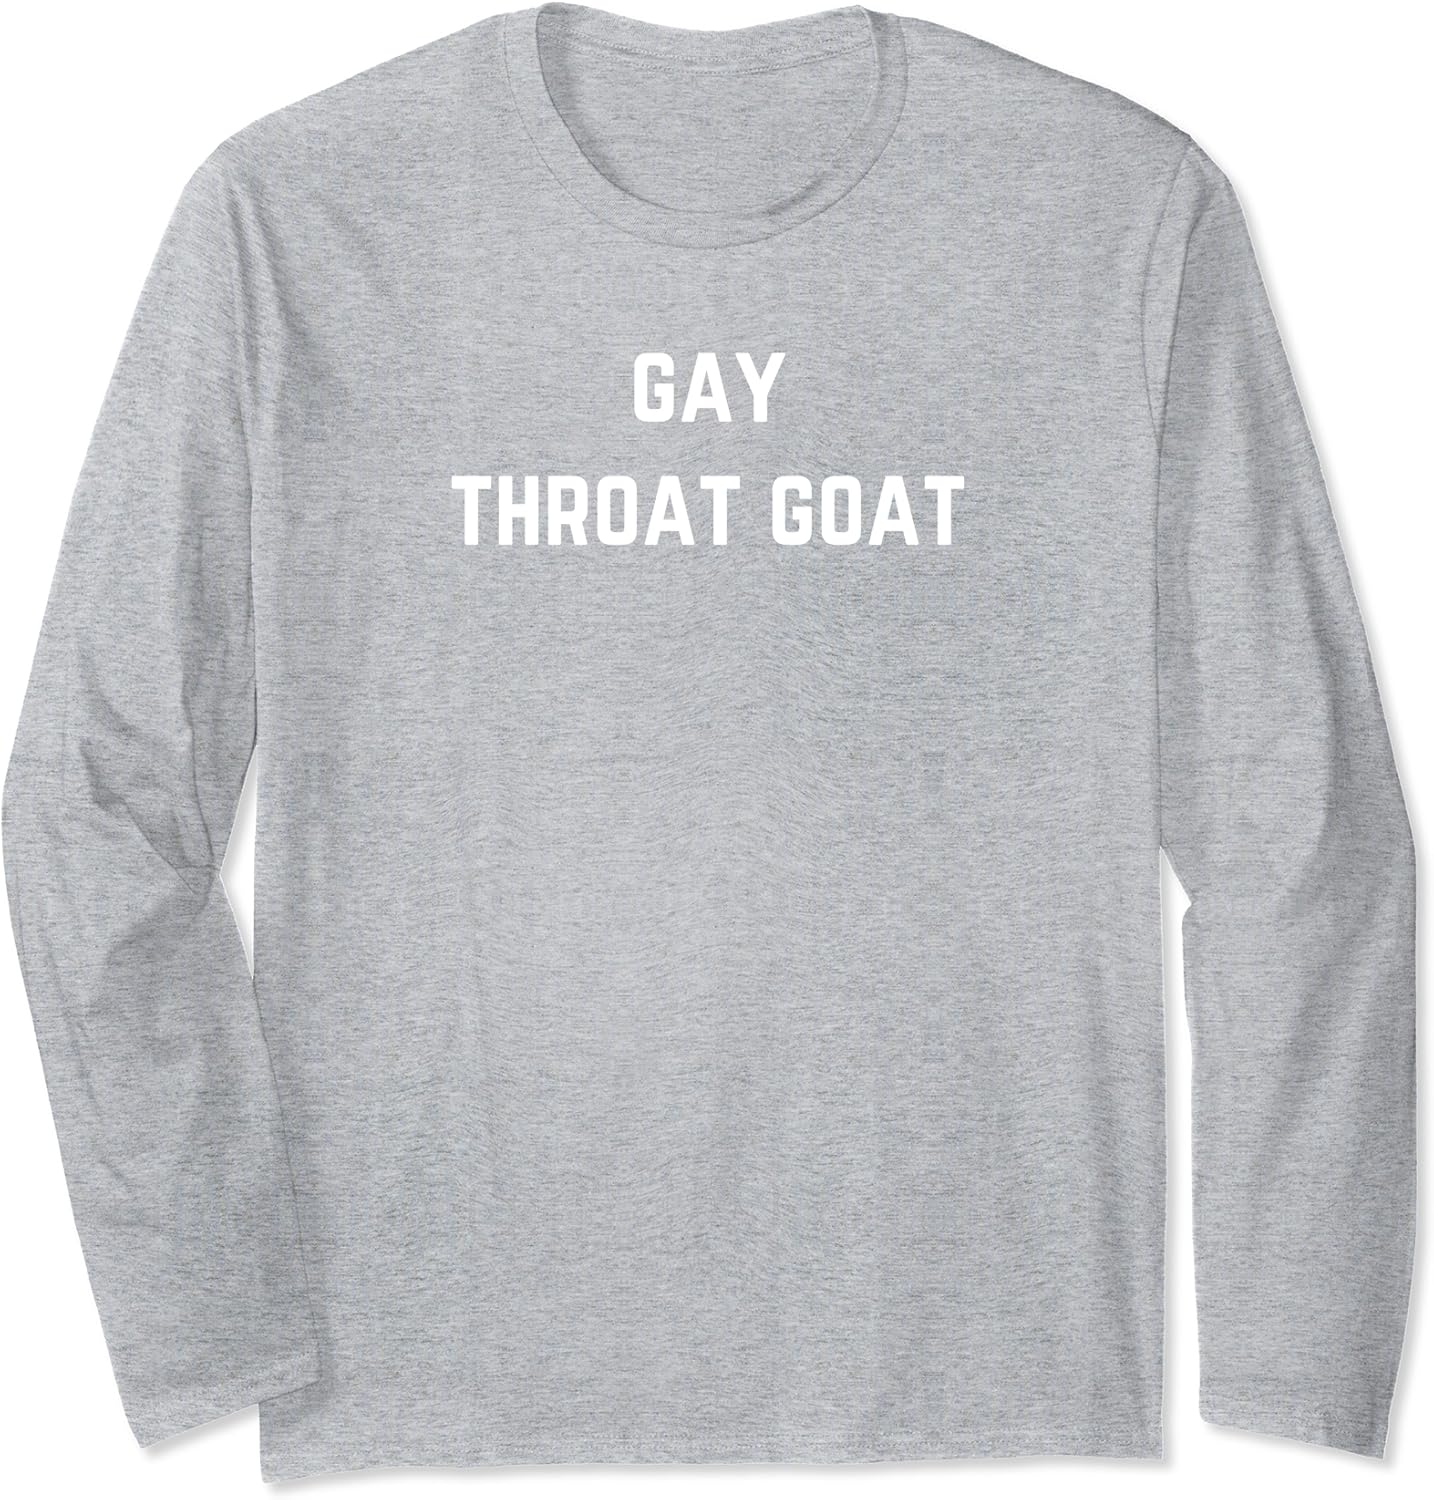 christopher granada recommends Throat Goat Meaning